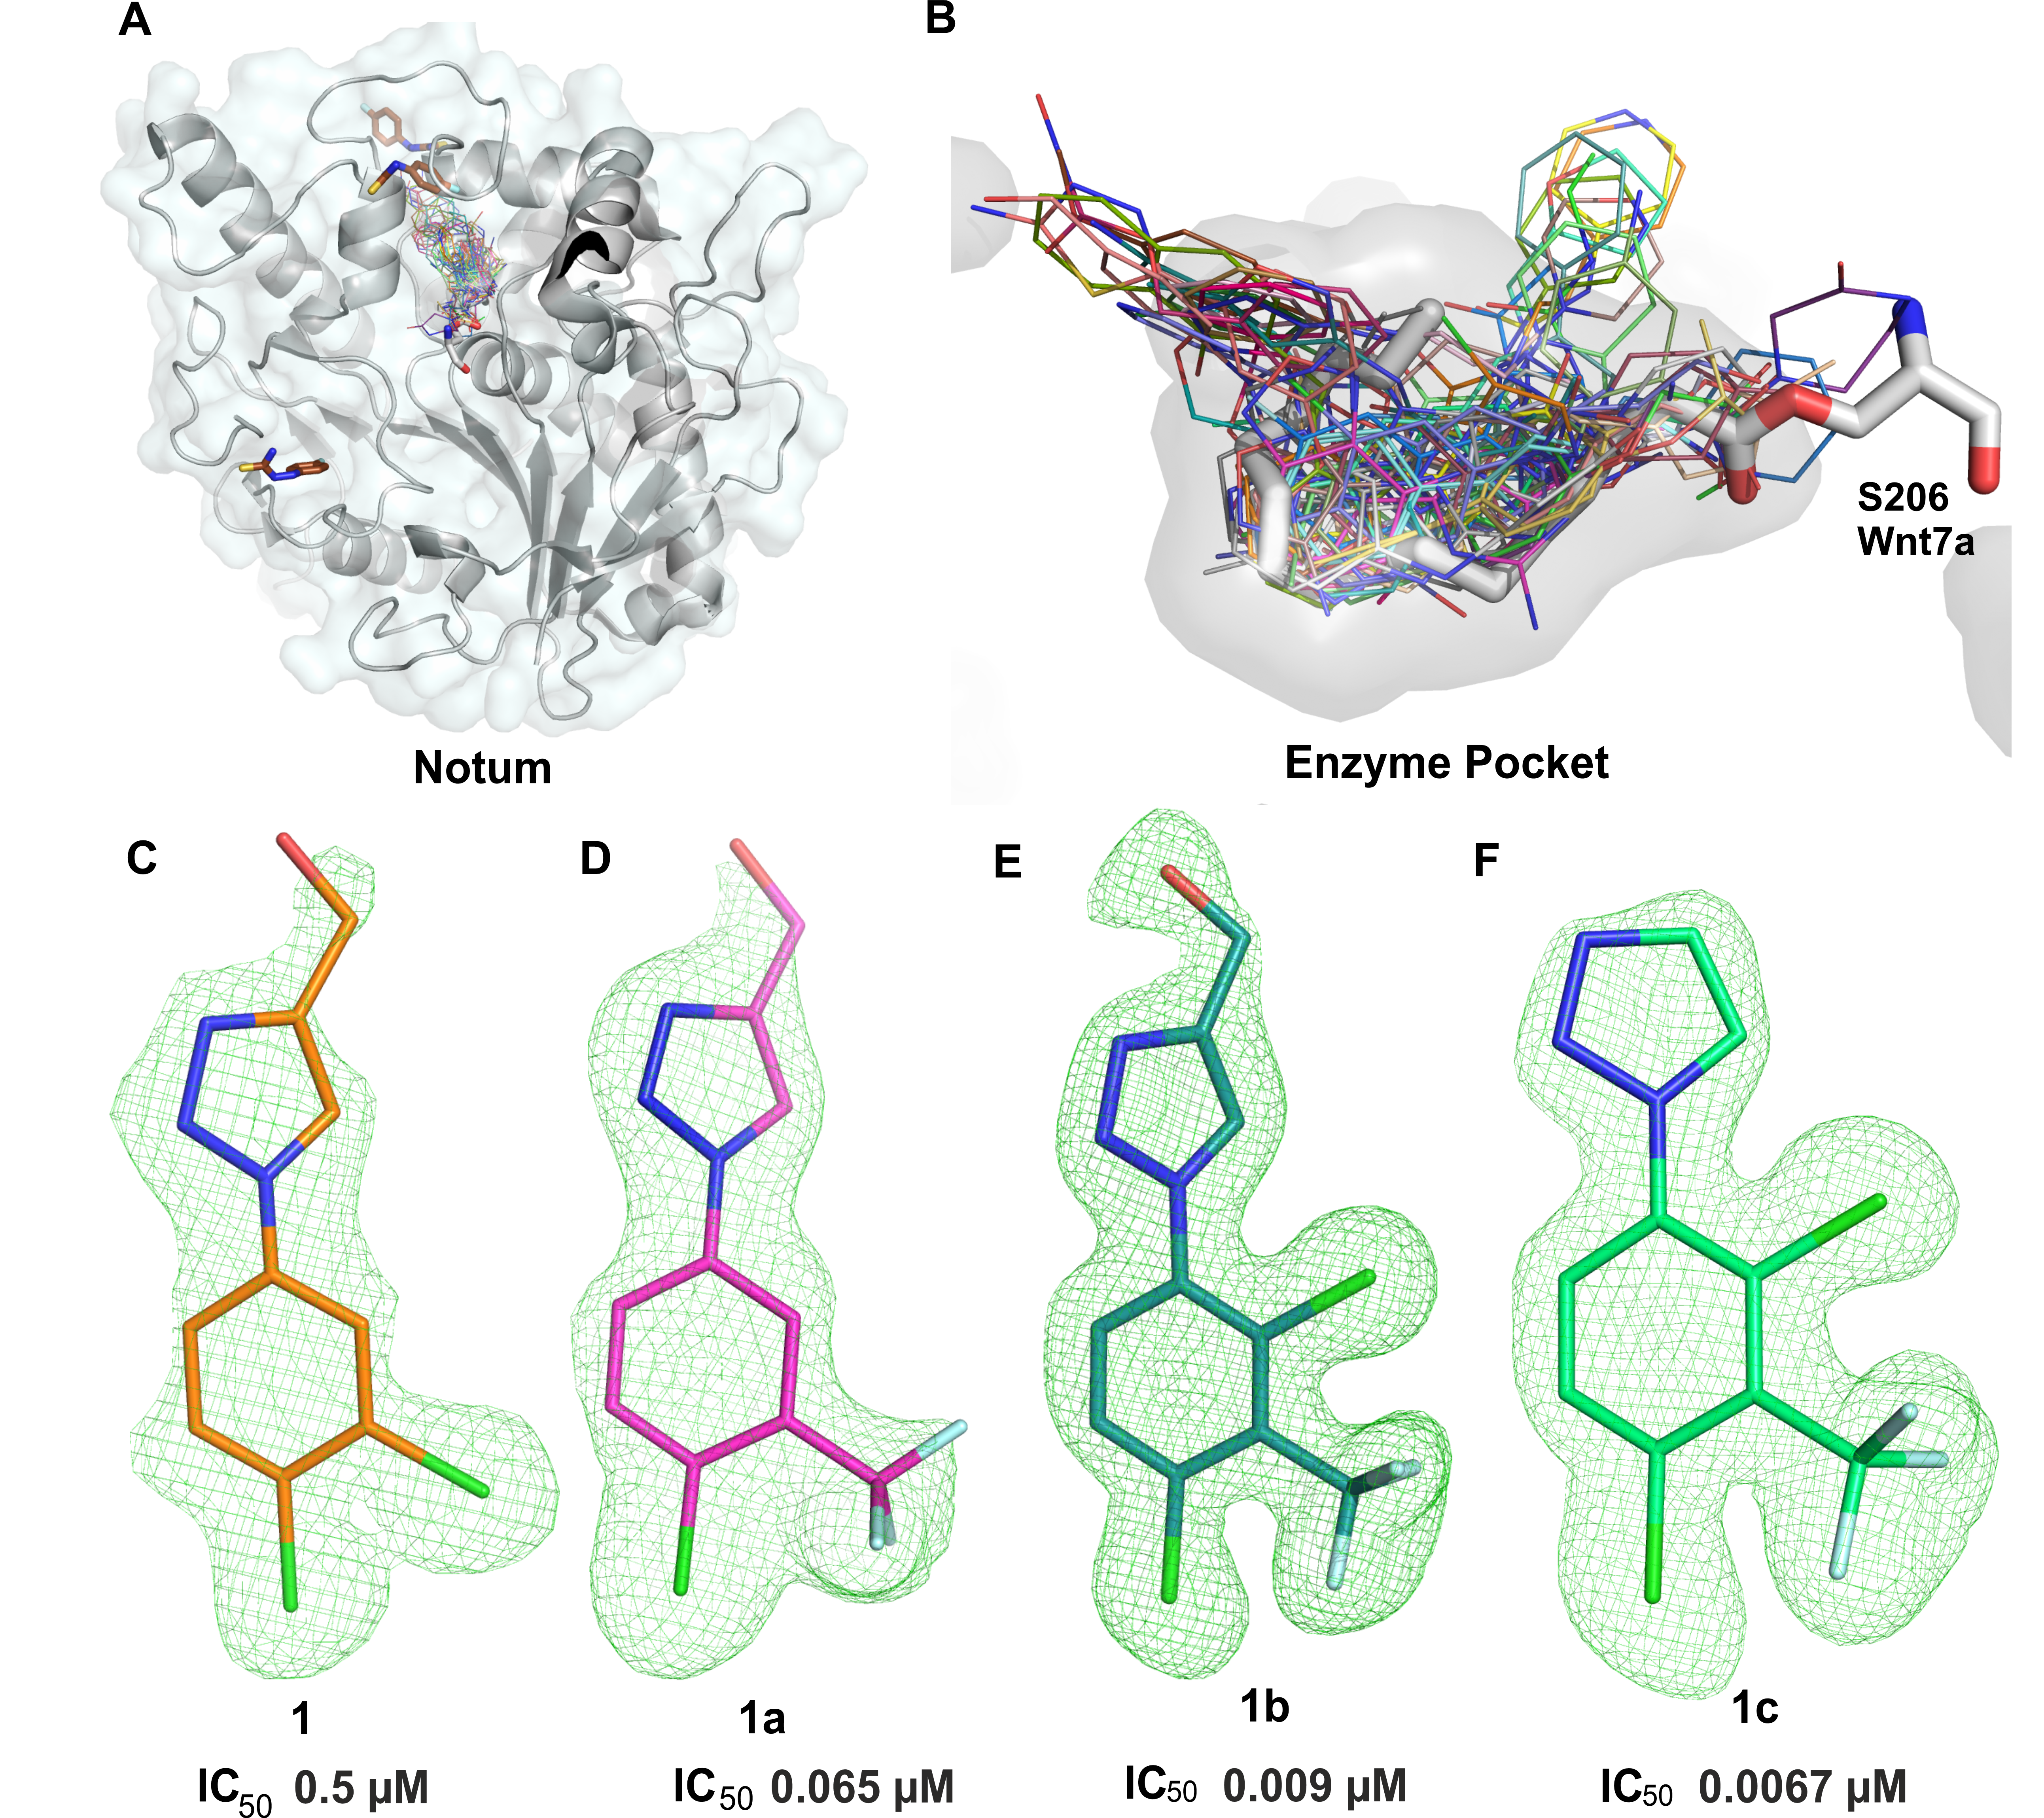 The Notum structure and the fragment hits within the enzyme pocket. (A) Notum structure shown as cartoon and fragment hits from complex structures were superimposed alongside the natural substrate (PAM)-bound structure. (B) Close-up view of the enzyme pocket hits. (C–F) The electron density maps for the fragment 1 and its derivatives with their potencies. 1c shows lead like properties with good brain penetrating capability.  